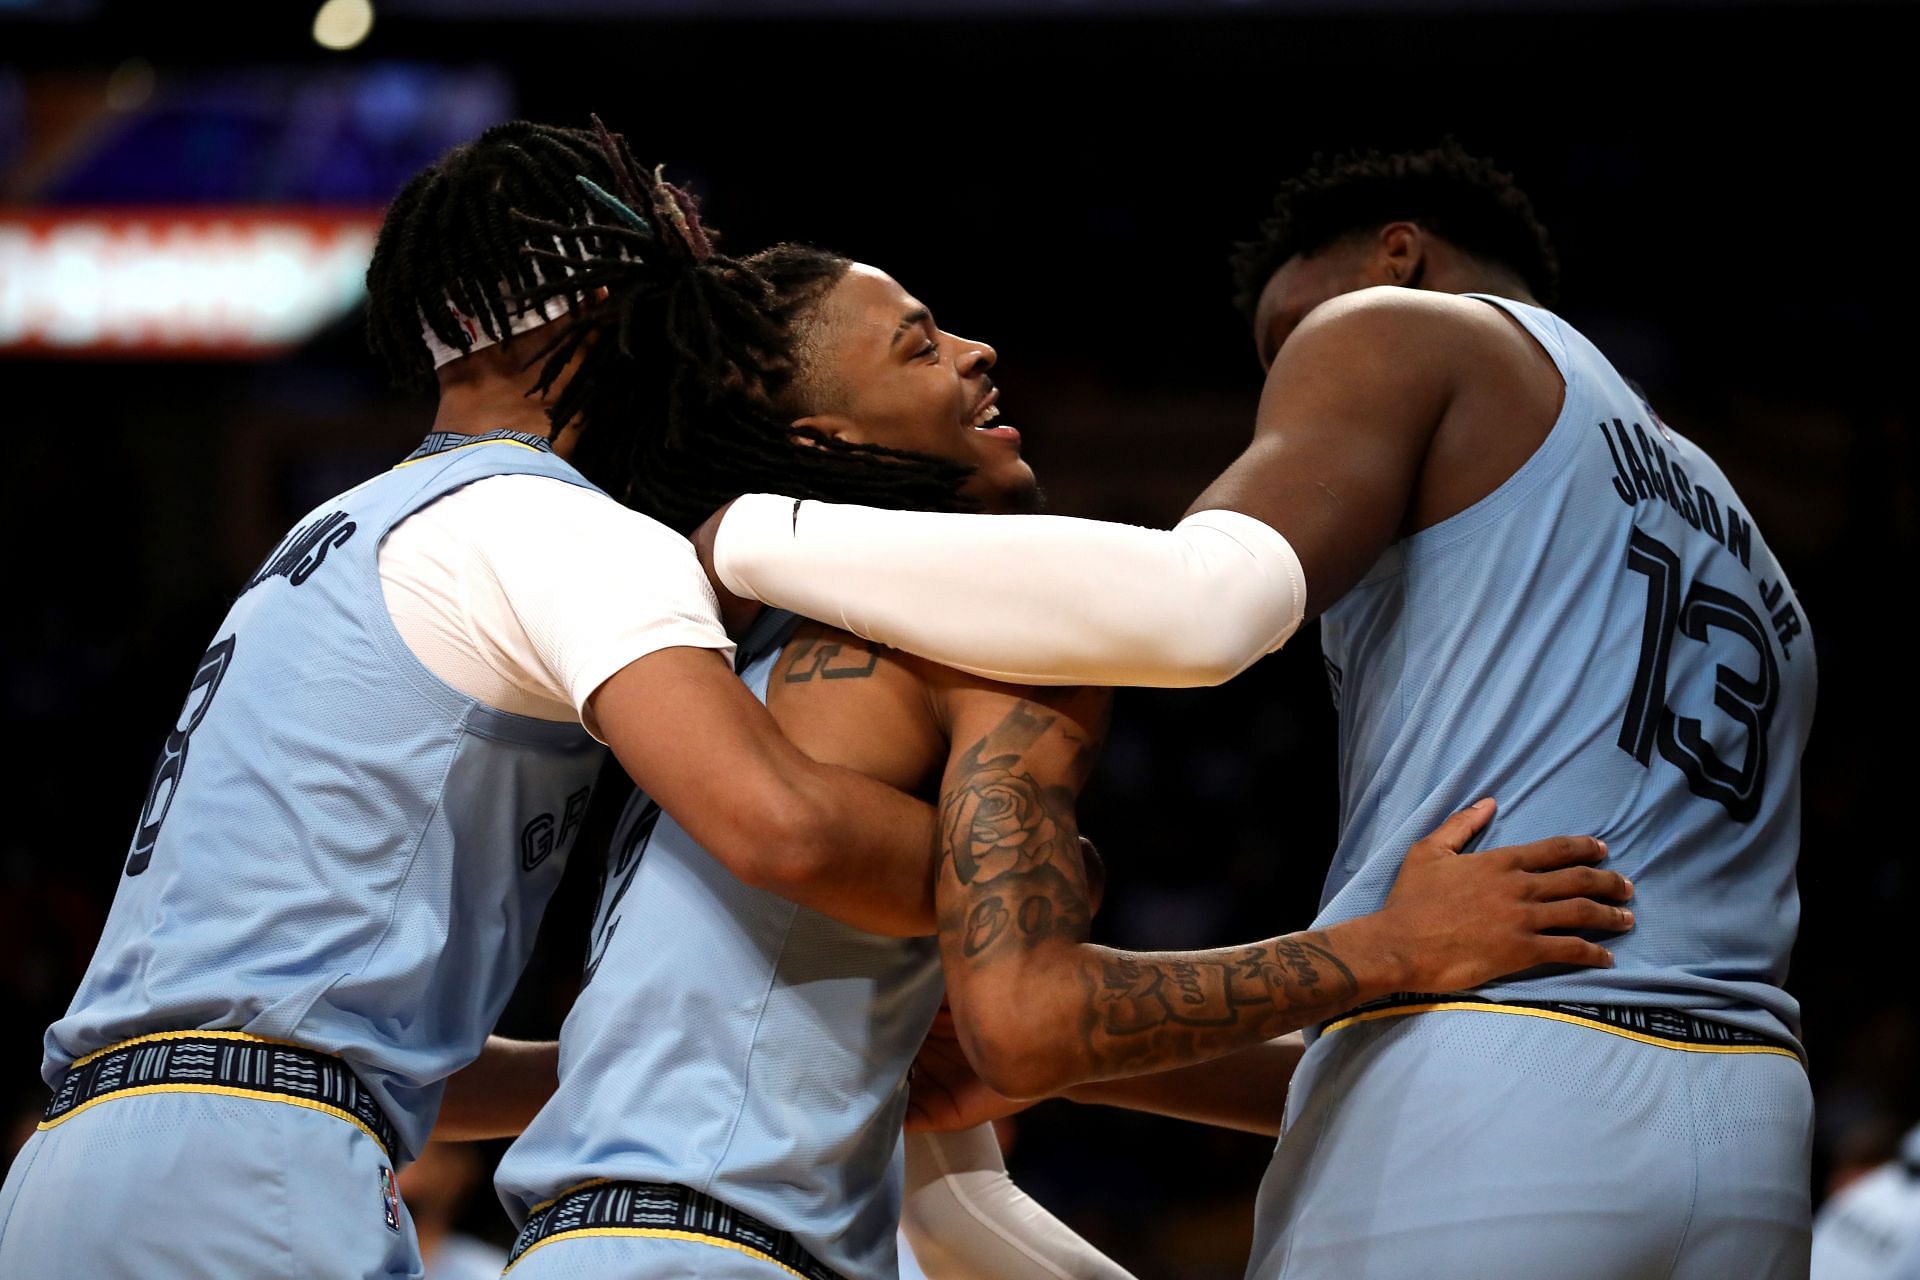 The Memphis Grizzlies against the Los Angeles Lakers